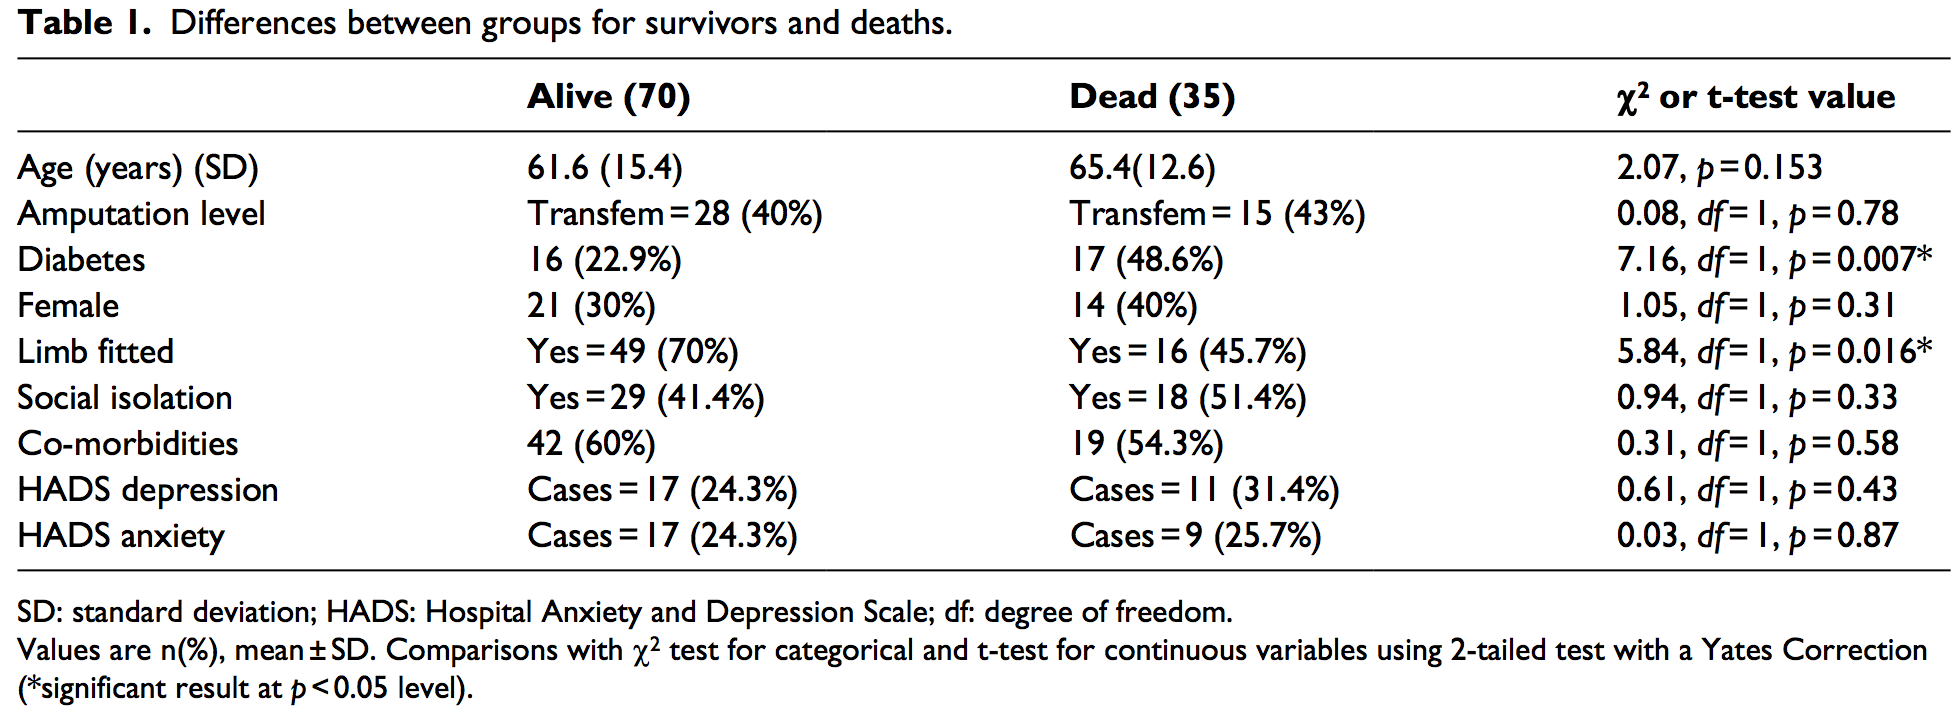 Summary data from a study of 5-year mortality rates among lower-limb amputees